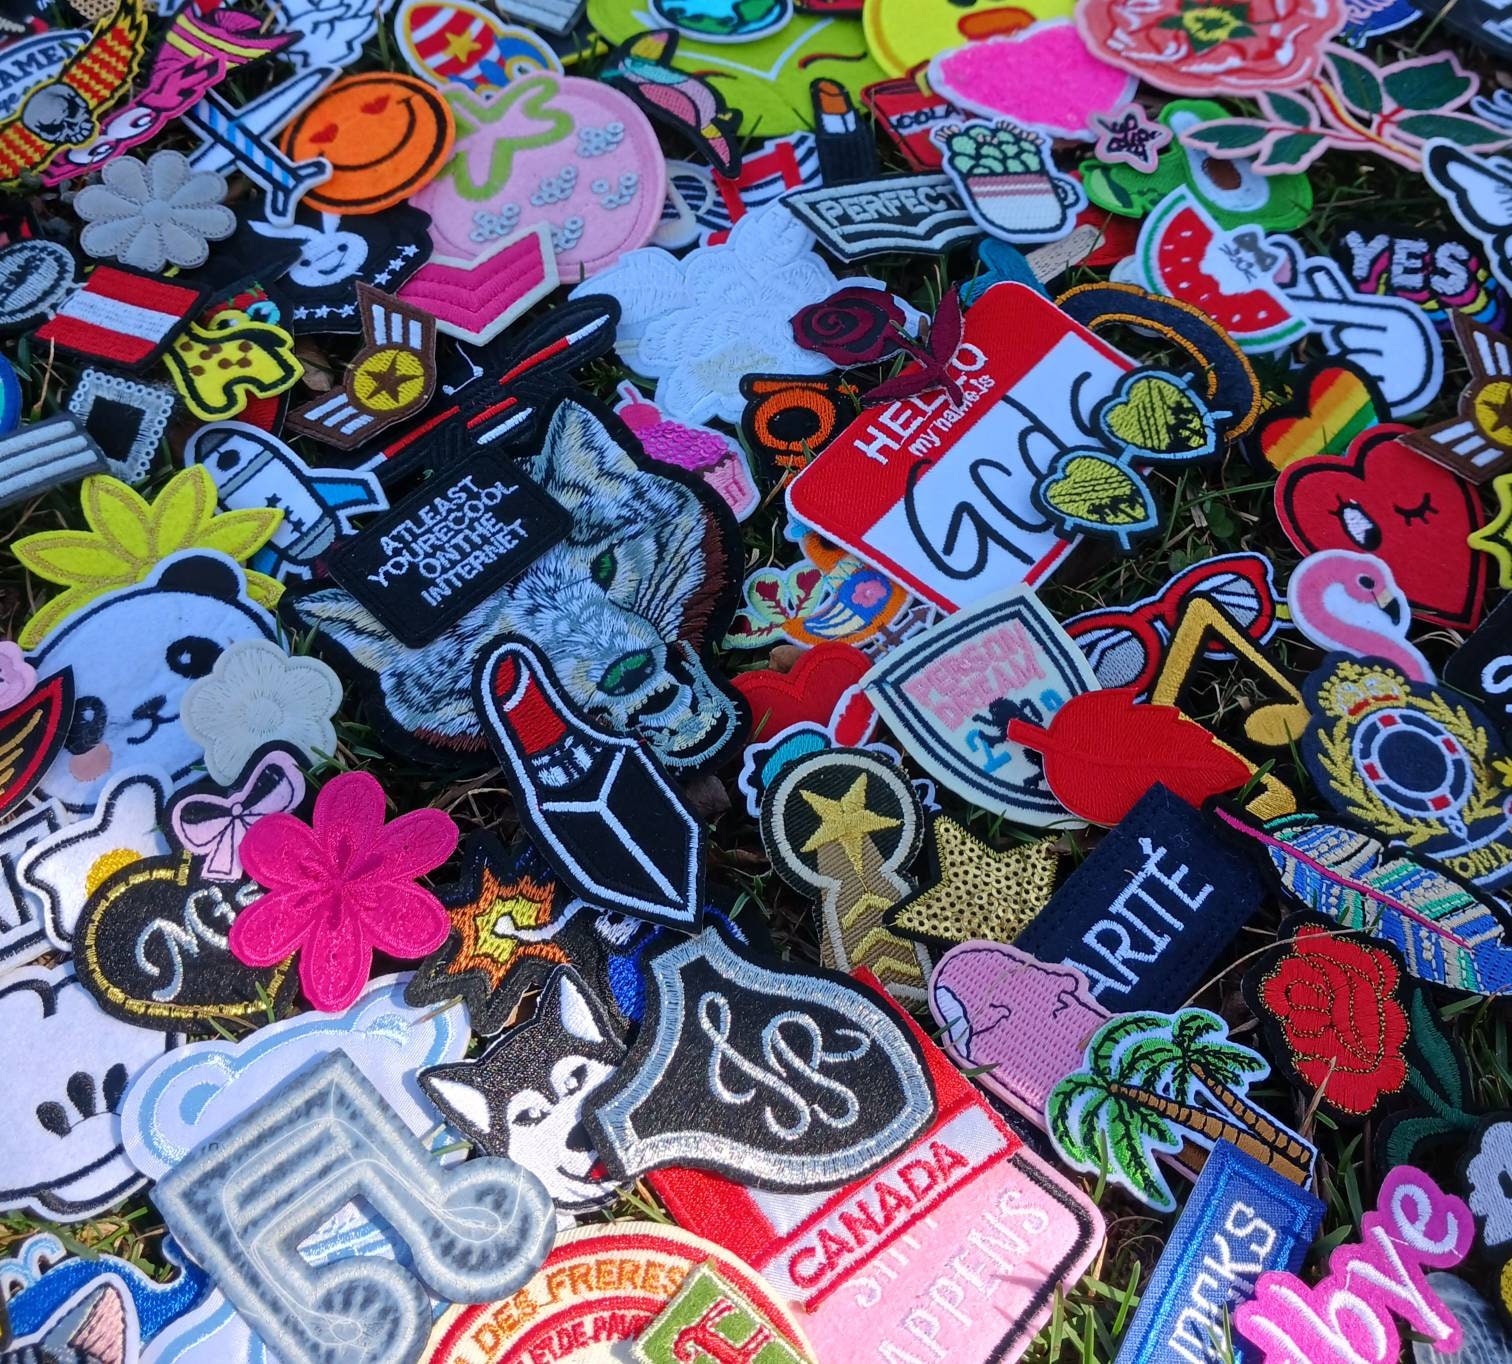 IRON Bundle of 100 Randomly Picked Mystery Iron on Patches Surprise Grab  Bag Brand New High Quality Free USA Shipping Huge Patch Lot Sale 